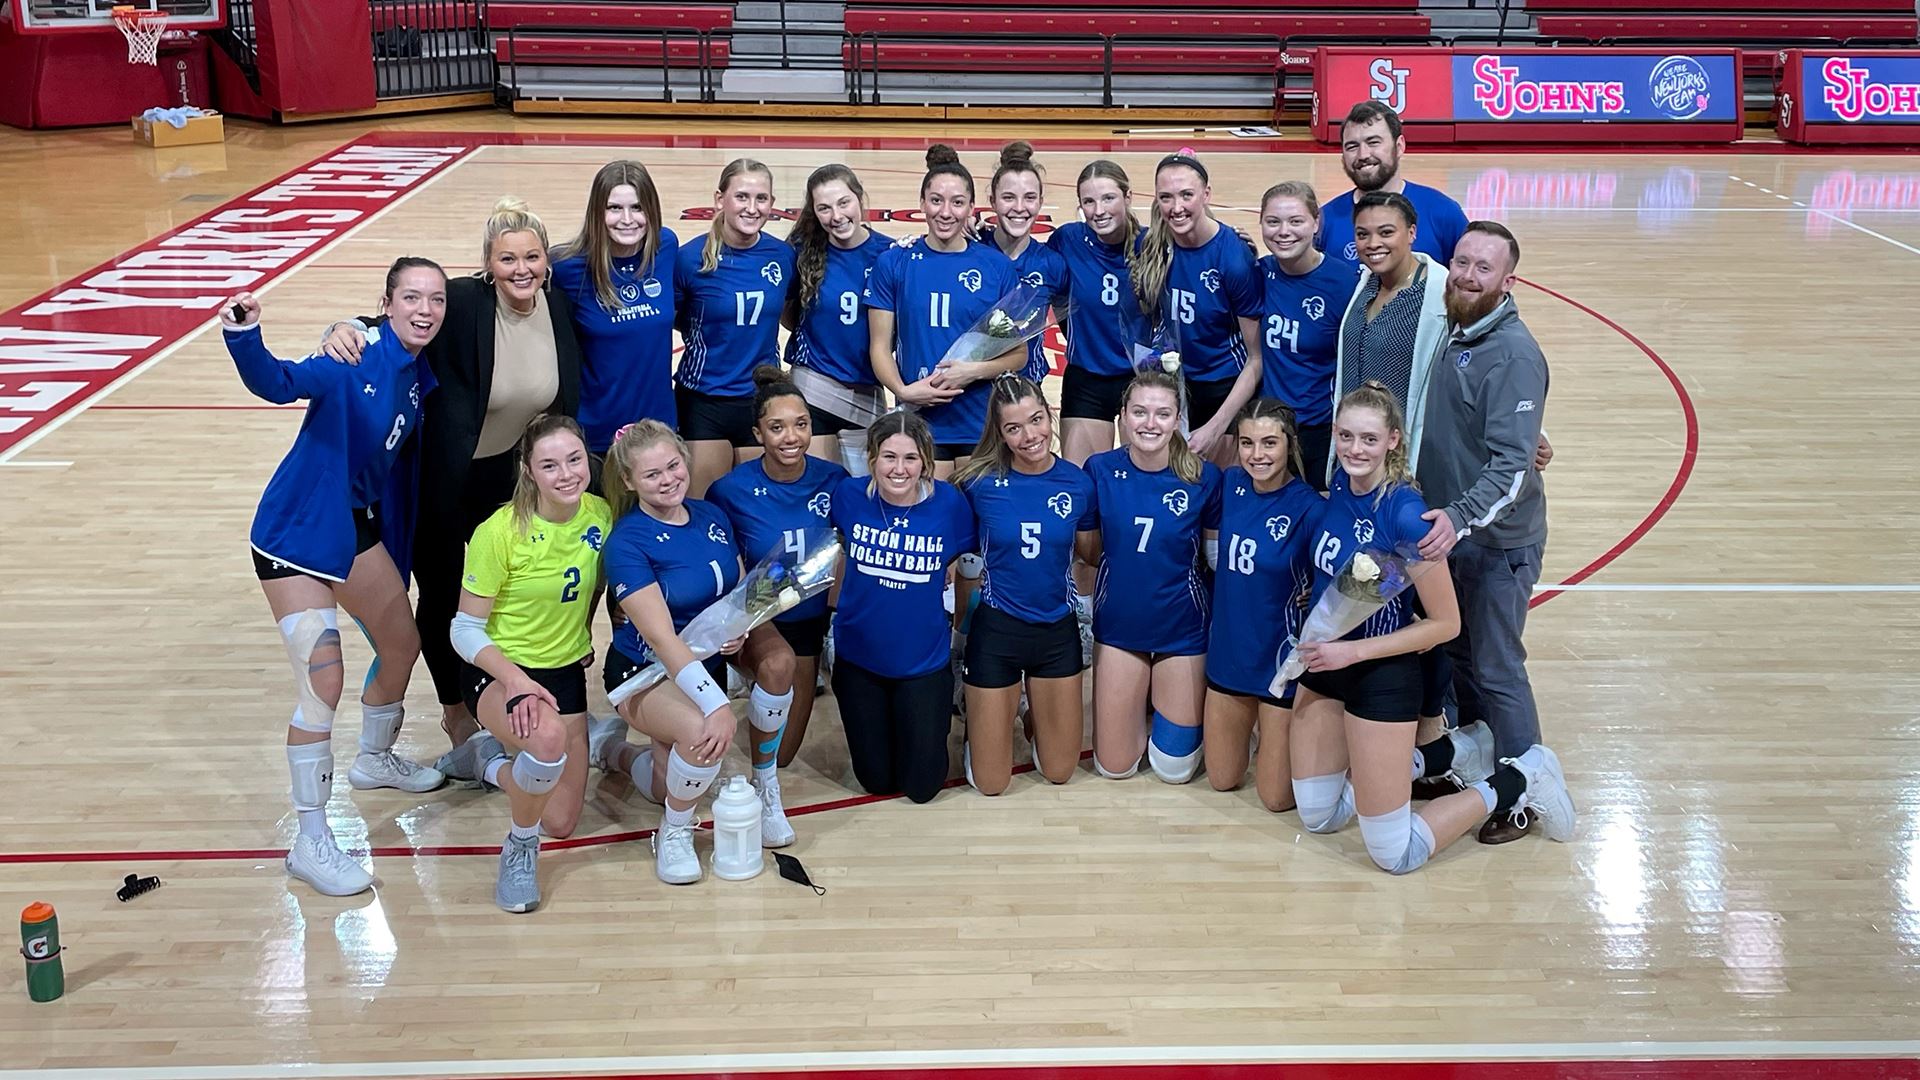 The Seton Hall women's volleyball team poses for a photo after defeating St. John's.